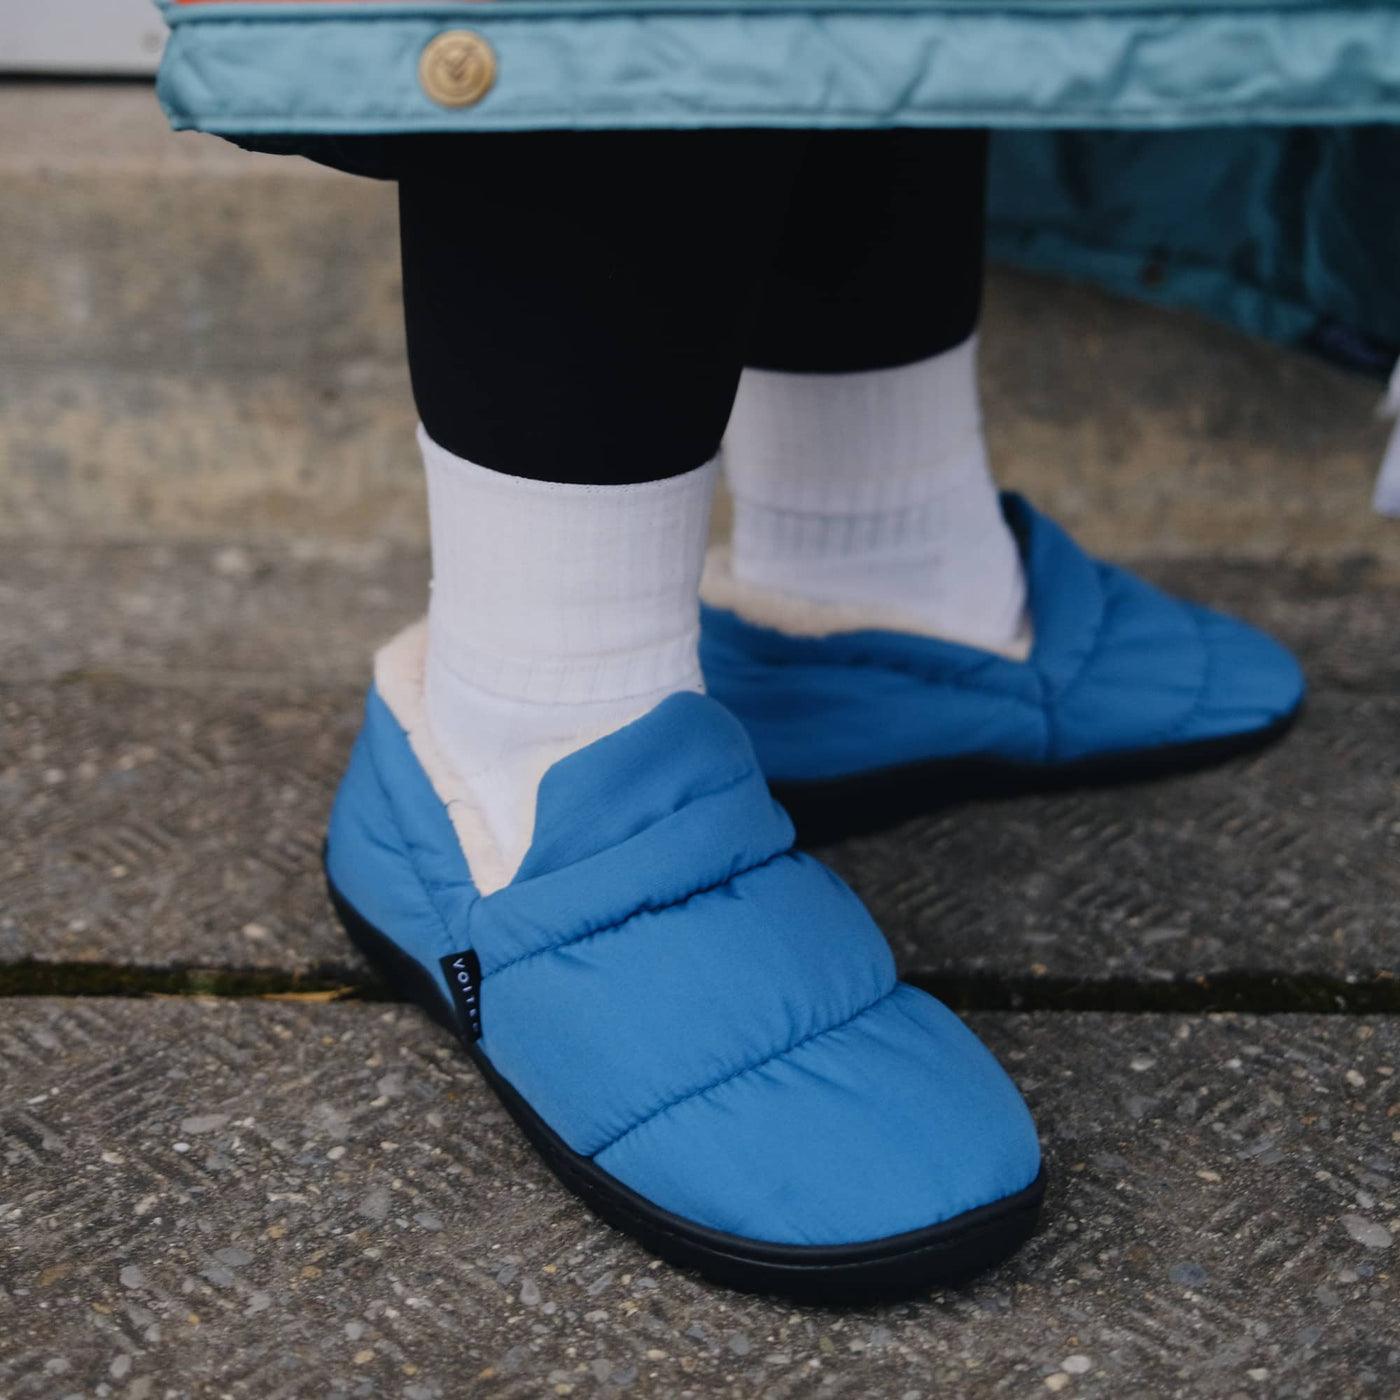 VOITED CloudTouch® Slippers - Lightweight, Indoor/Outdoor Fleece-Lined Camping Slippers - Arctic Blue